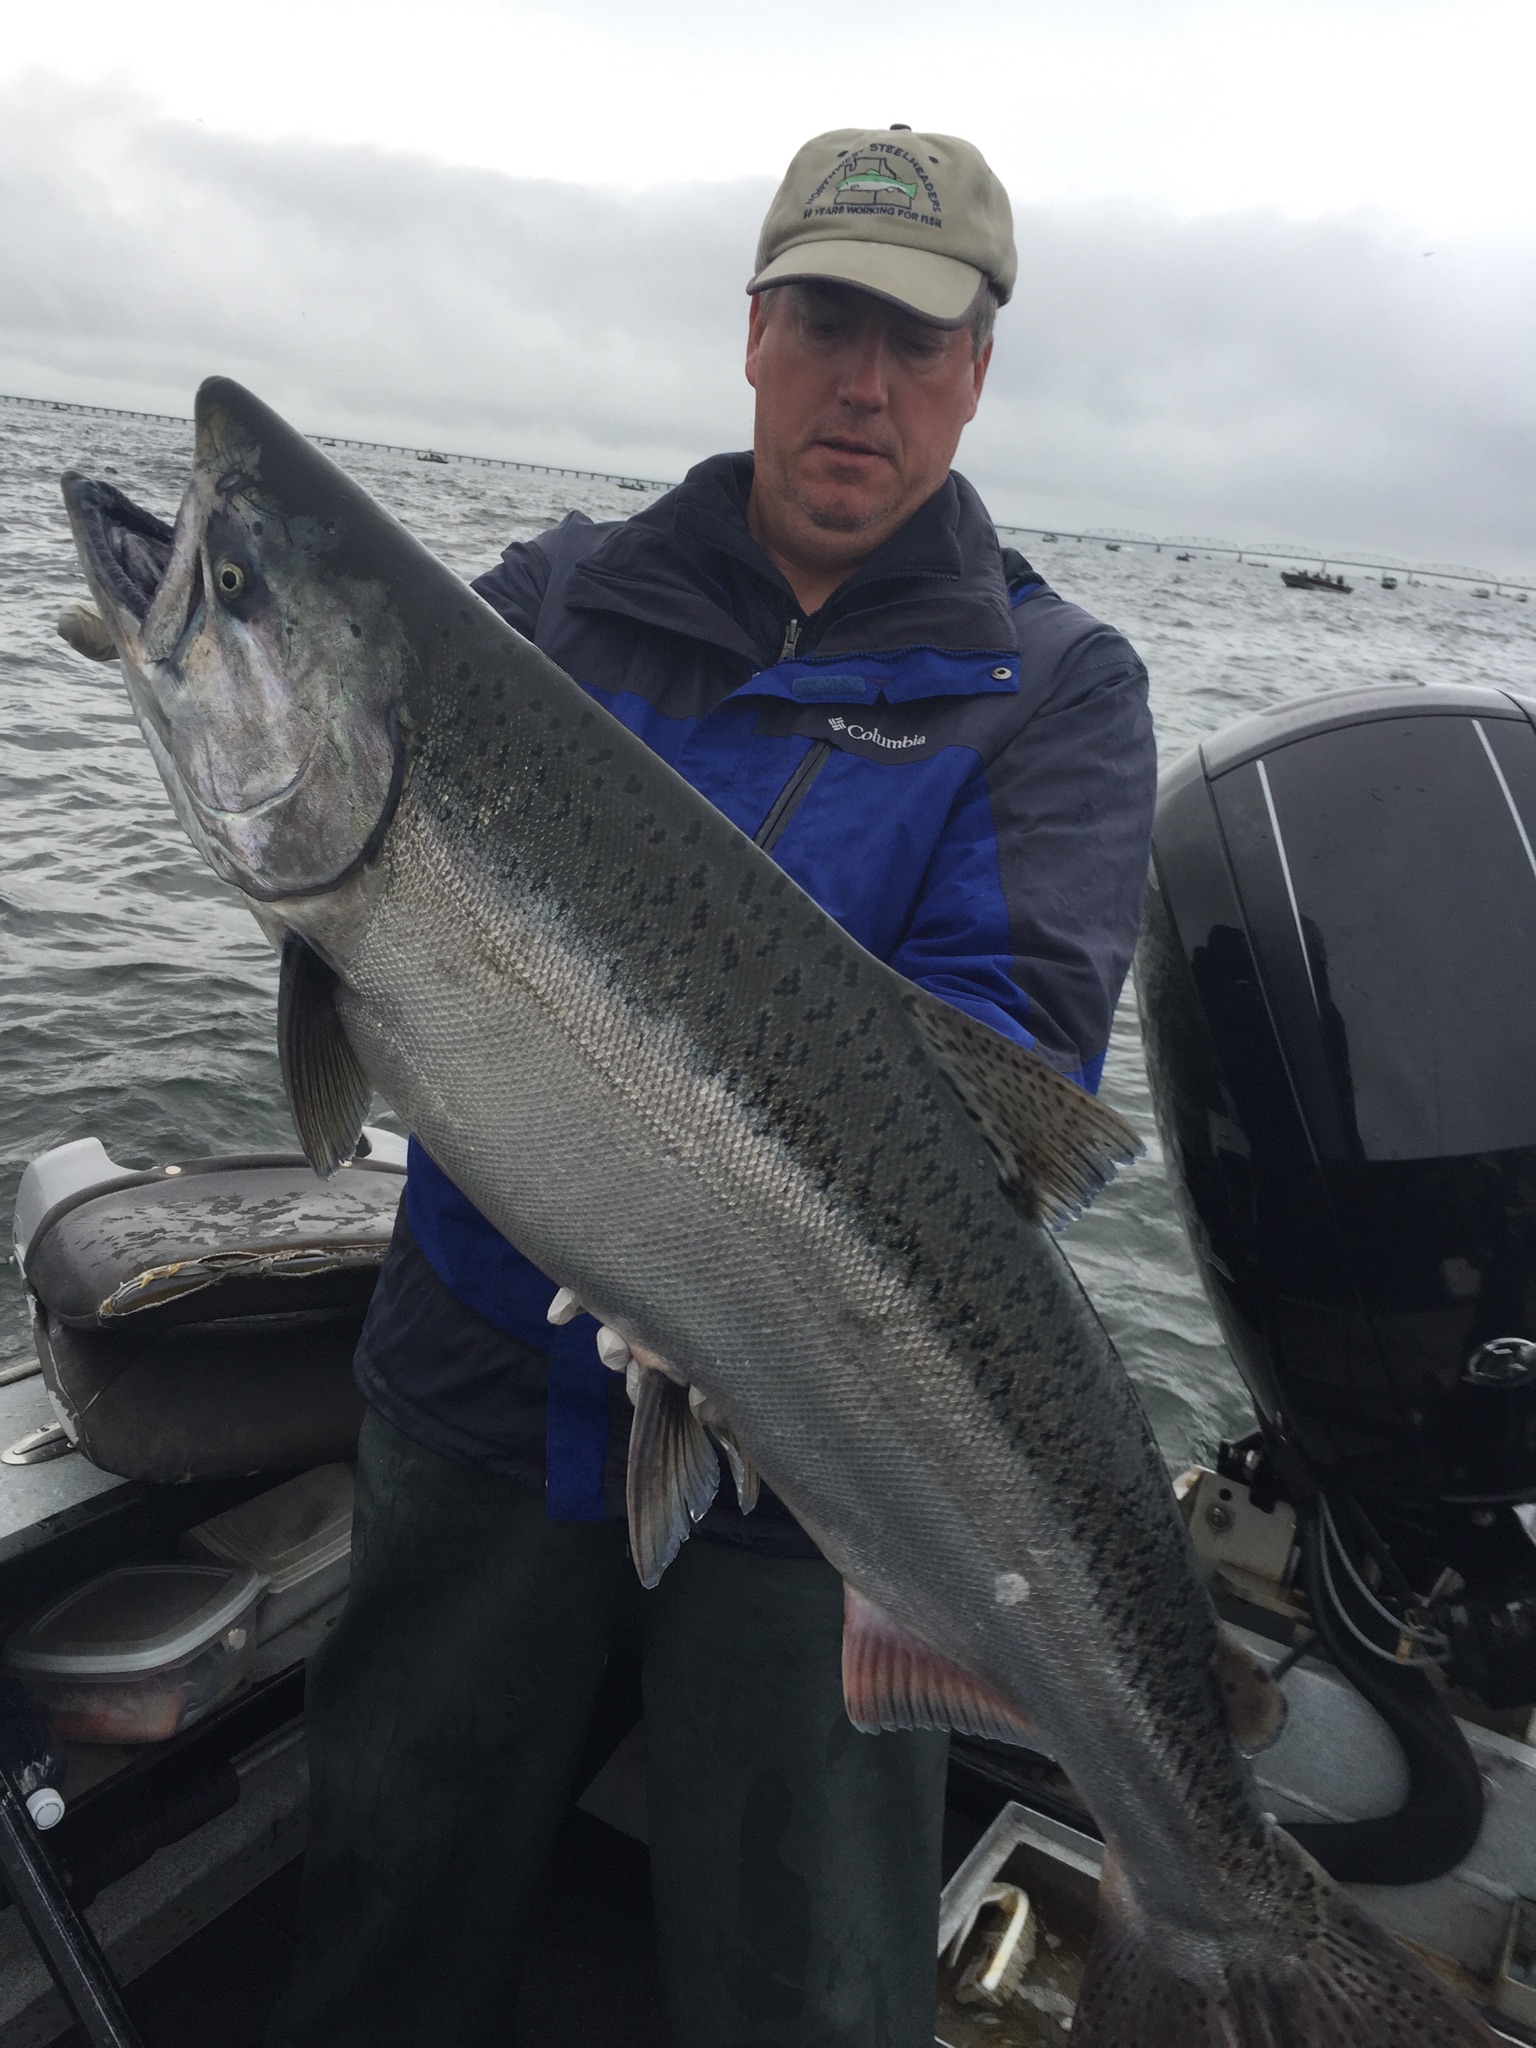 Bob Rees with a Buoy 10 Chinook taken on 8/9/16